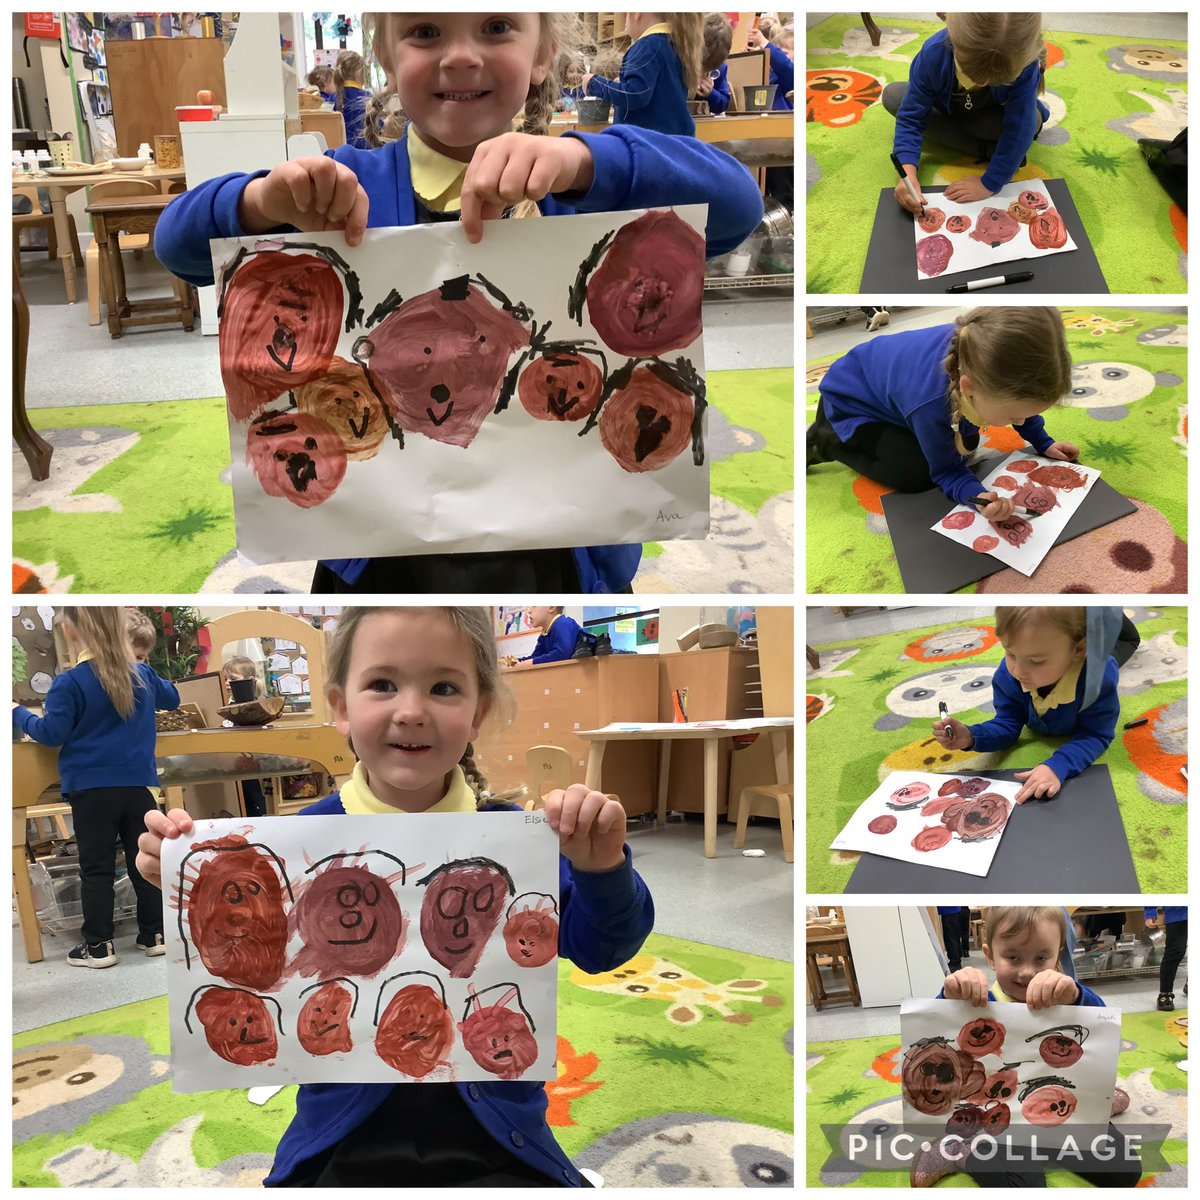 We listened to the story ‘The Skin You Live In’ and explored the paints to mix different skin tones to help us create people🥰This helped us to explore our value of the month diversity, by showing us that we all live in our own skin and it’s just us being ourselves❤️@cwmffrwdoer